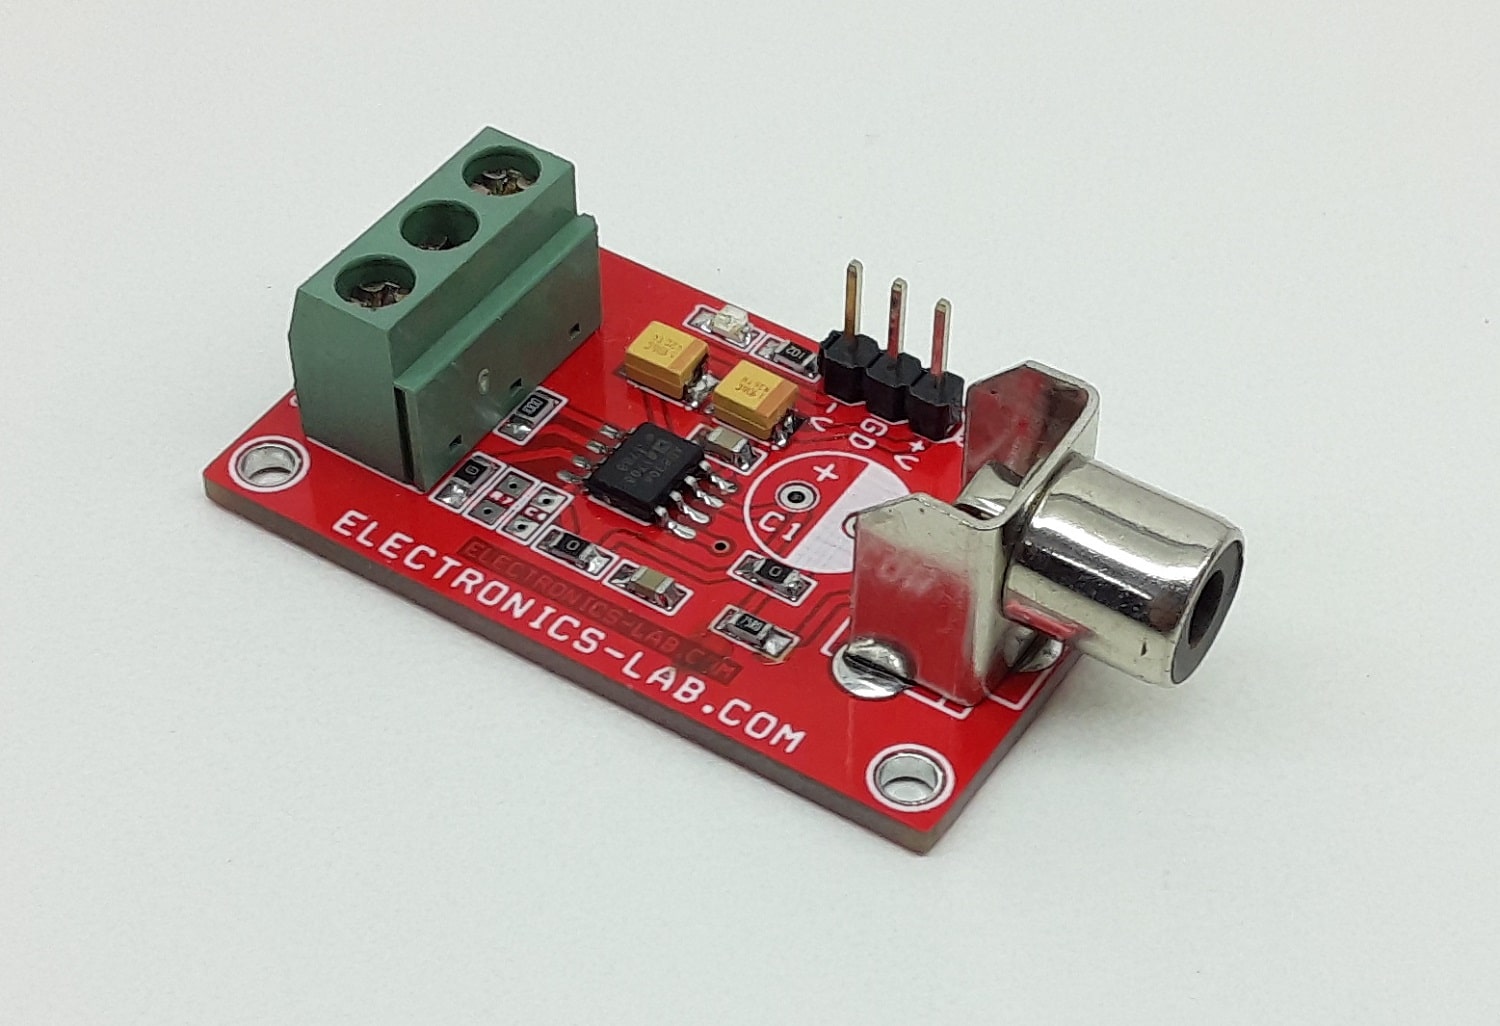 Balanced Line Receiver for Digital Signal Over Twisted Pair CAT-5 Cable